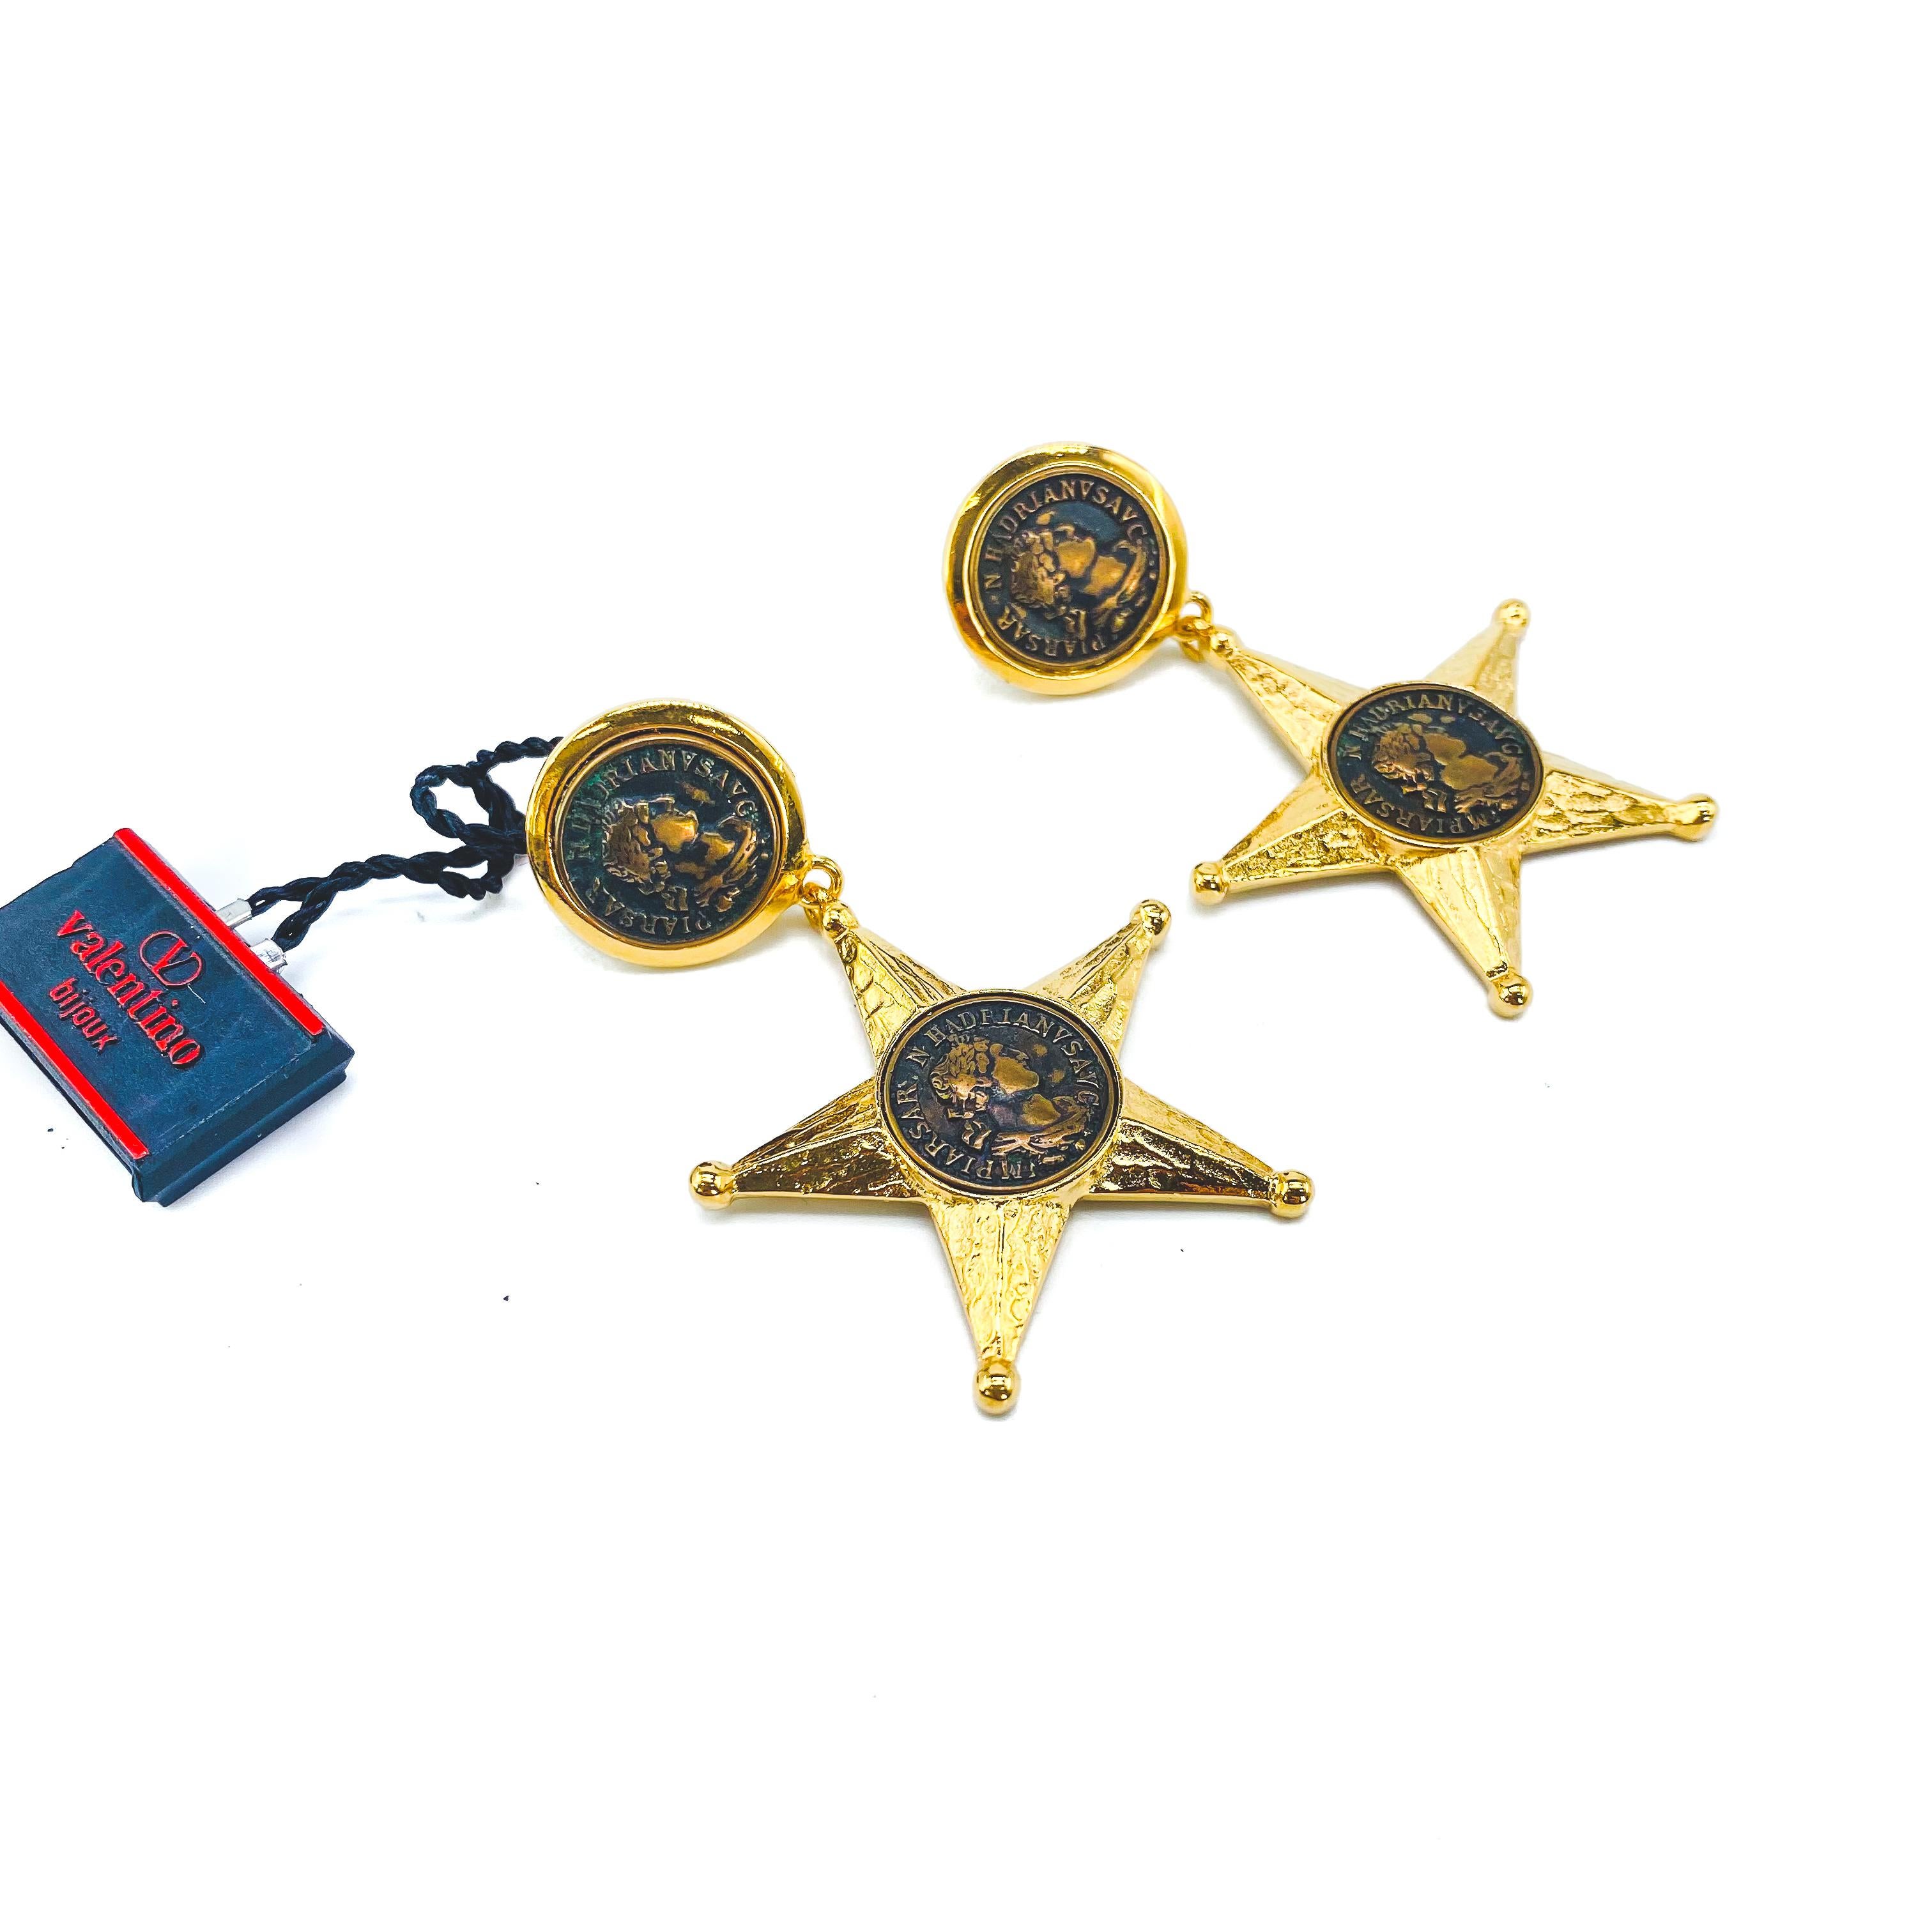 Valentino Vintage 1990s Clip On Earrings

Amazing star drop earrings from the iconic house of Valentino 

Detail
-Made in Italy in the 1990s
-Crafted from gold plated metal
-Set with Emperor Hadrian medals

Size & Fit
-Width measures approx  1.5